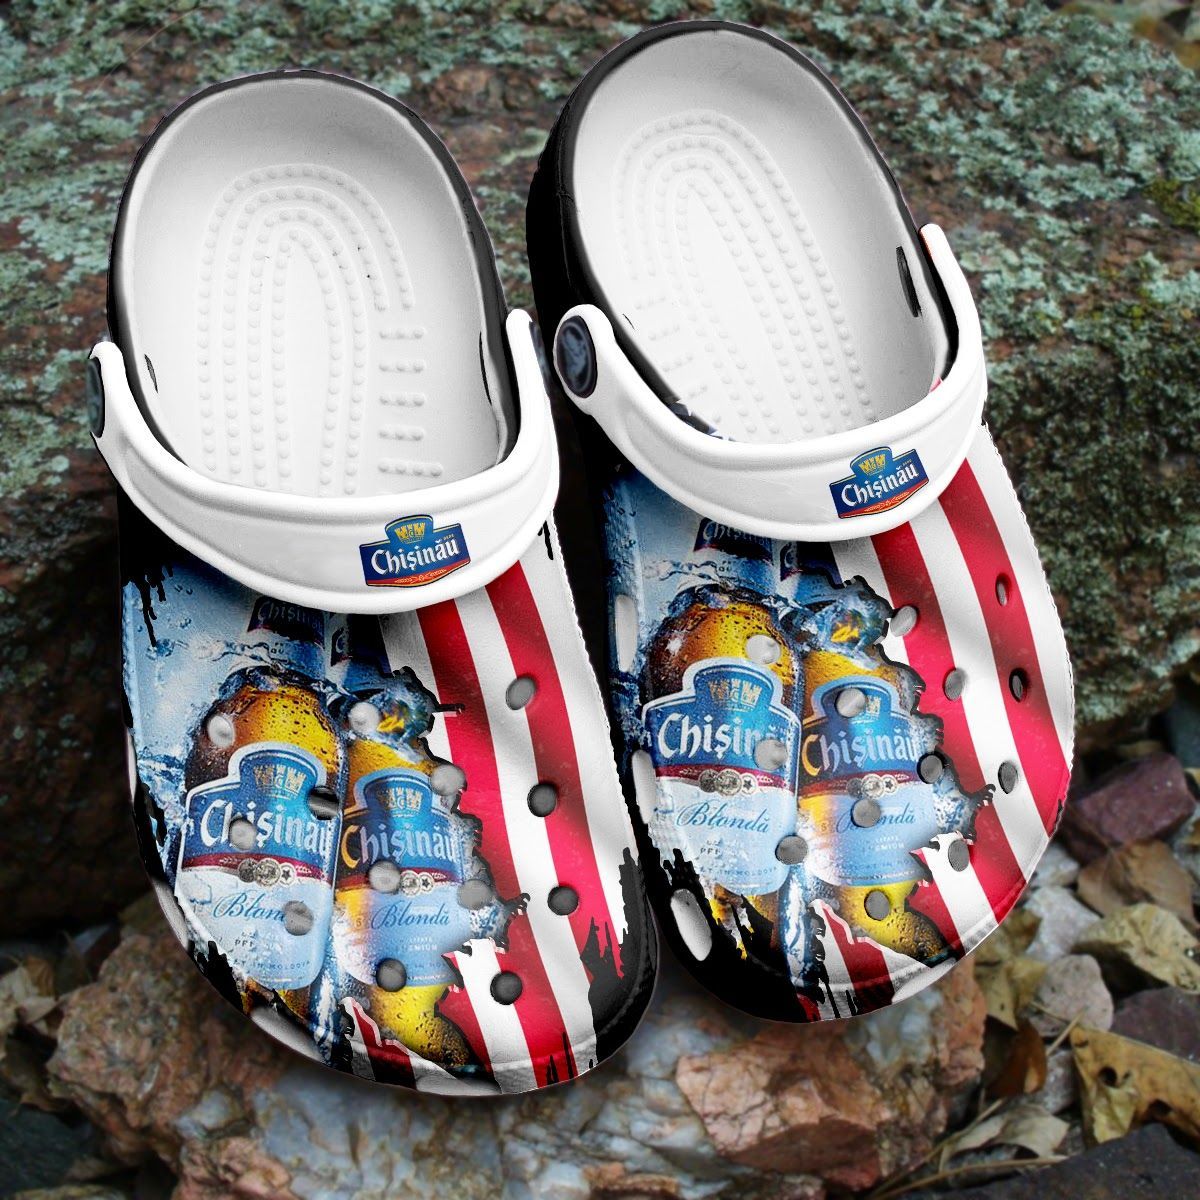 If you'd like to purchase a pair of Crocband Clogs, be sure to check out the official website. 104